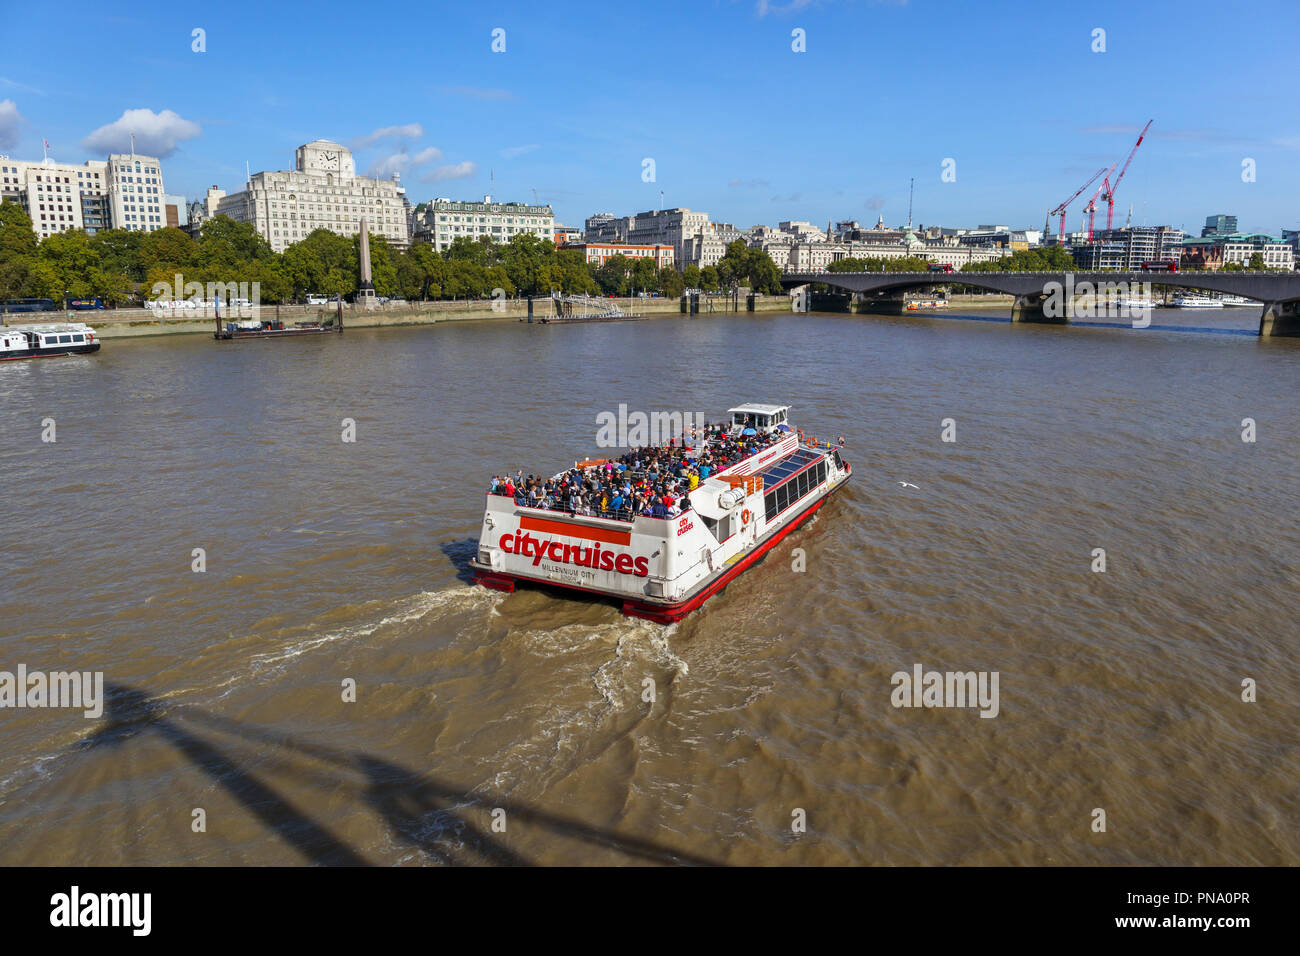 City Cruises cruise boat on the River Thames by Festival Pier and Waterloo Bridge, London, Shell-Mex House and Cleopatra's Needle on the Embankment Stock Photo